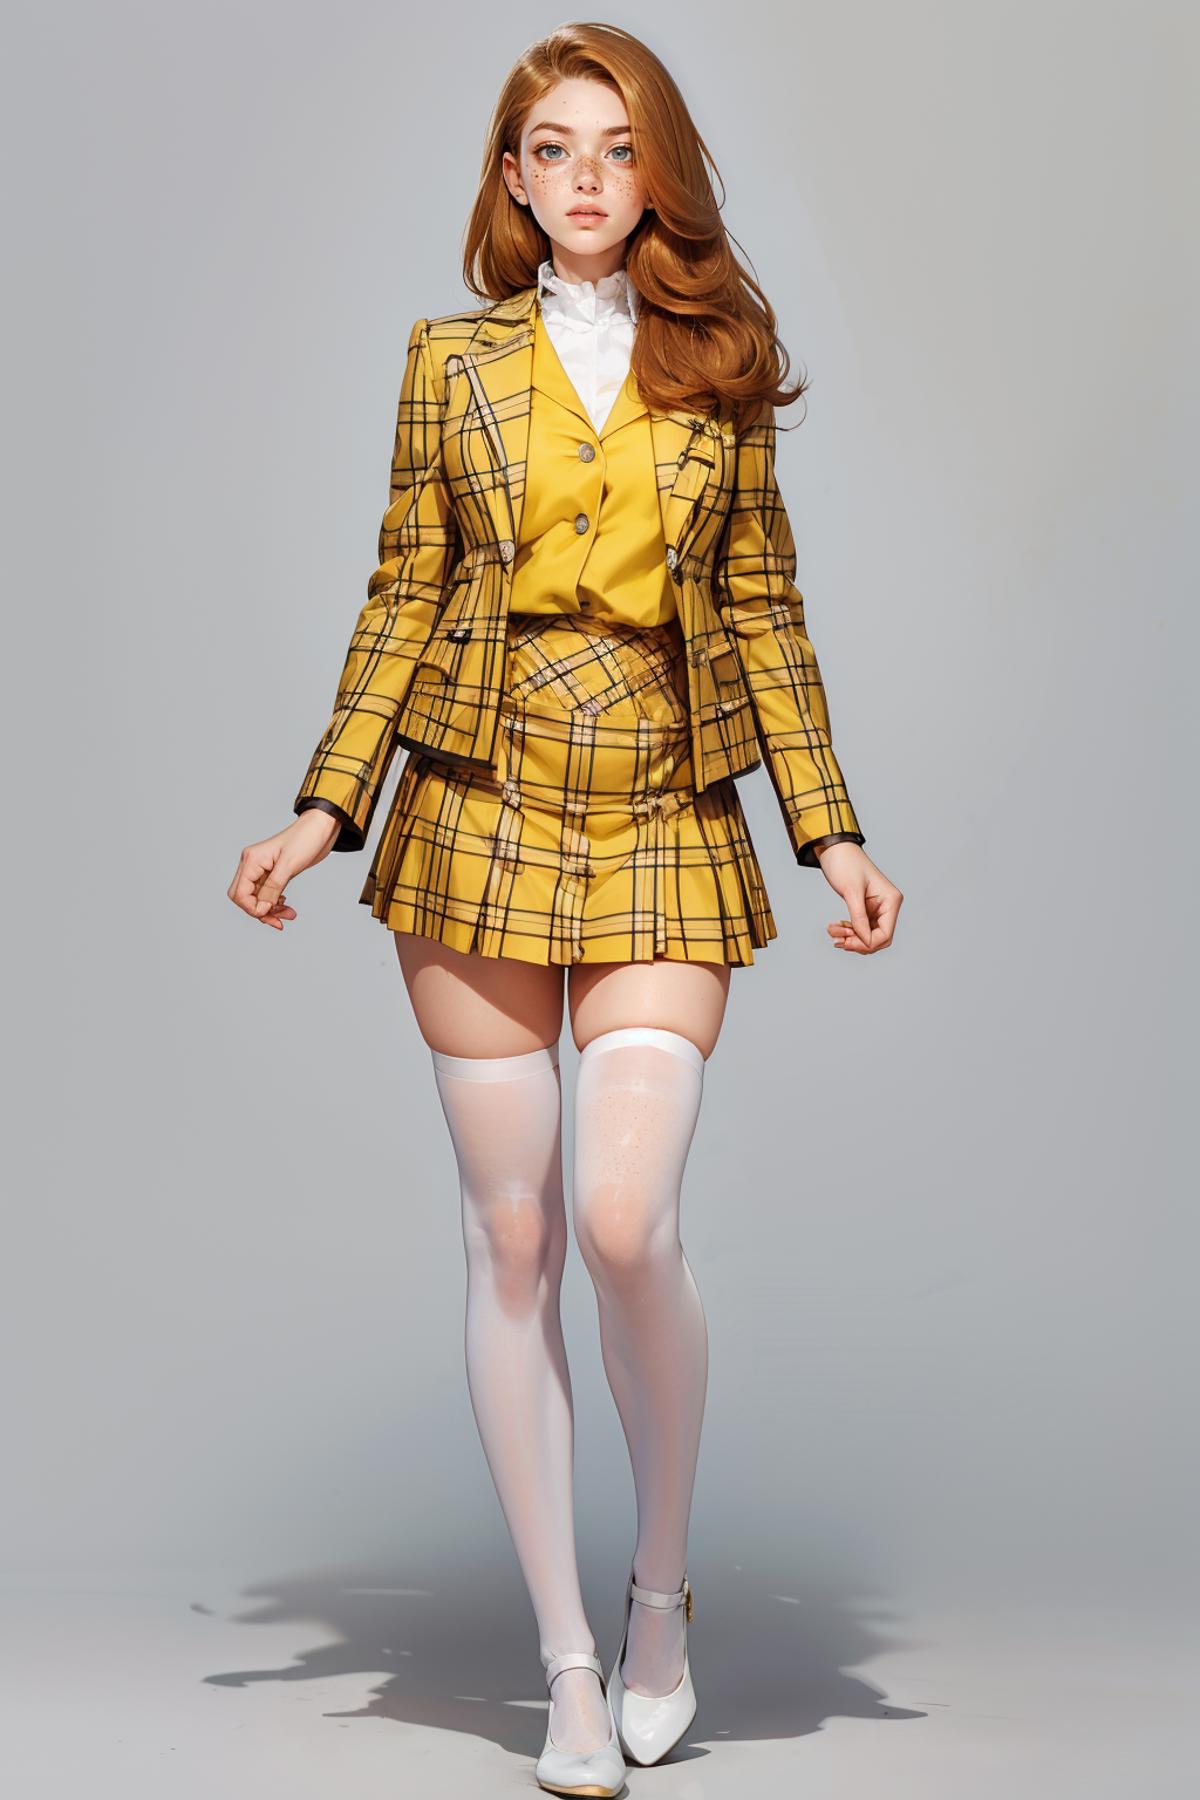 Clueless Yellow Plaid - Requested image by freckledvixon